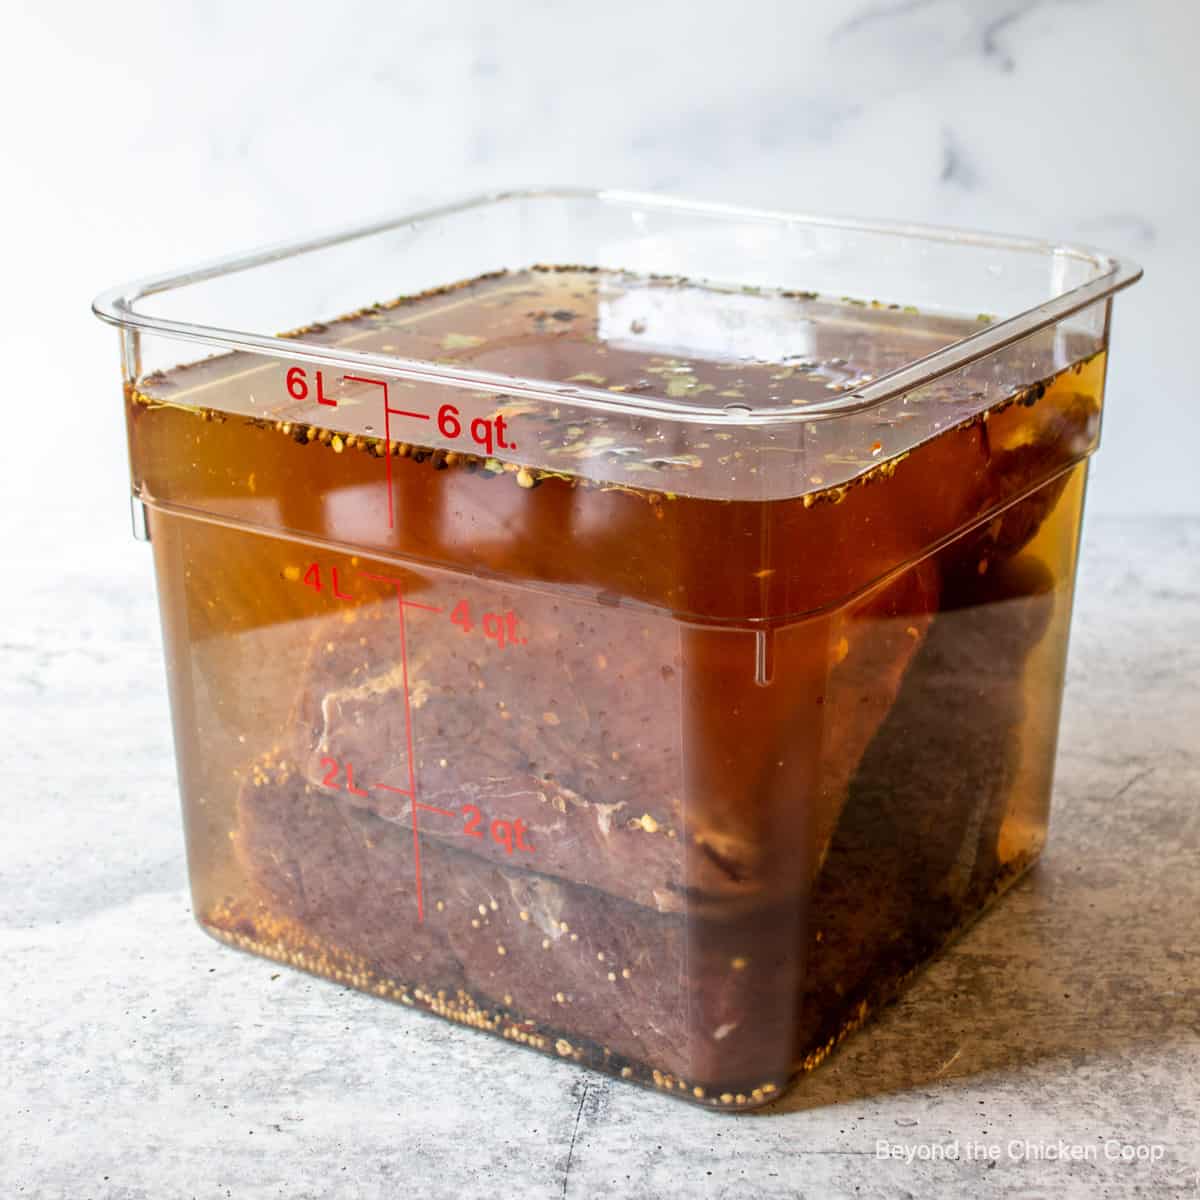 Roasts in a container filled with a brine.